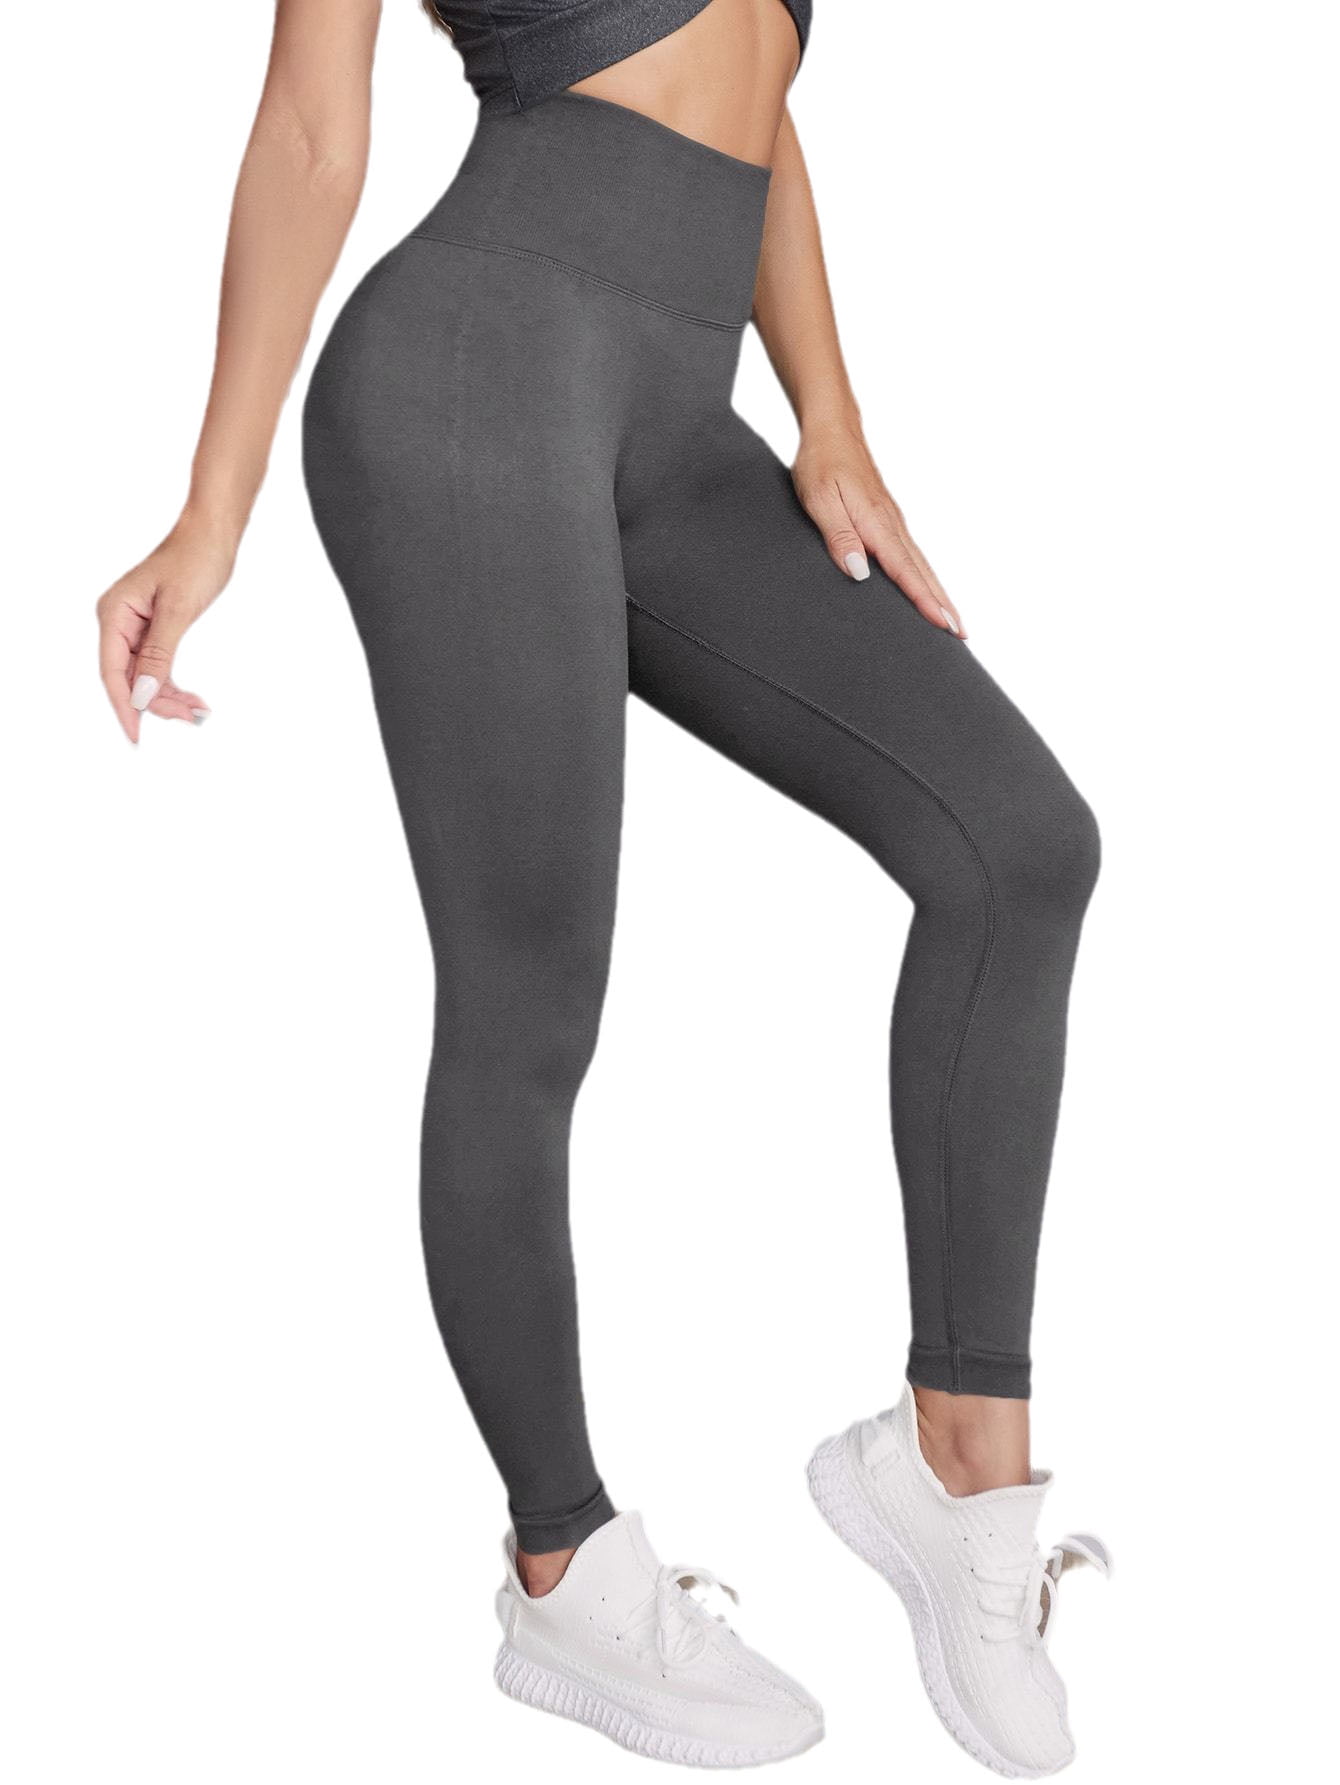 NELEUS Womens High Waist Ankle Yoga Leggings Workout with Two  Pockets,Gray,US Size S 